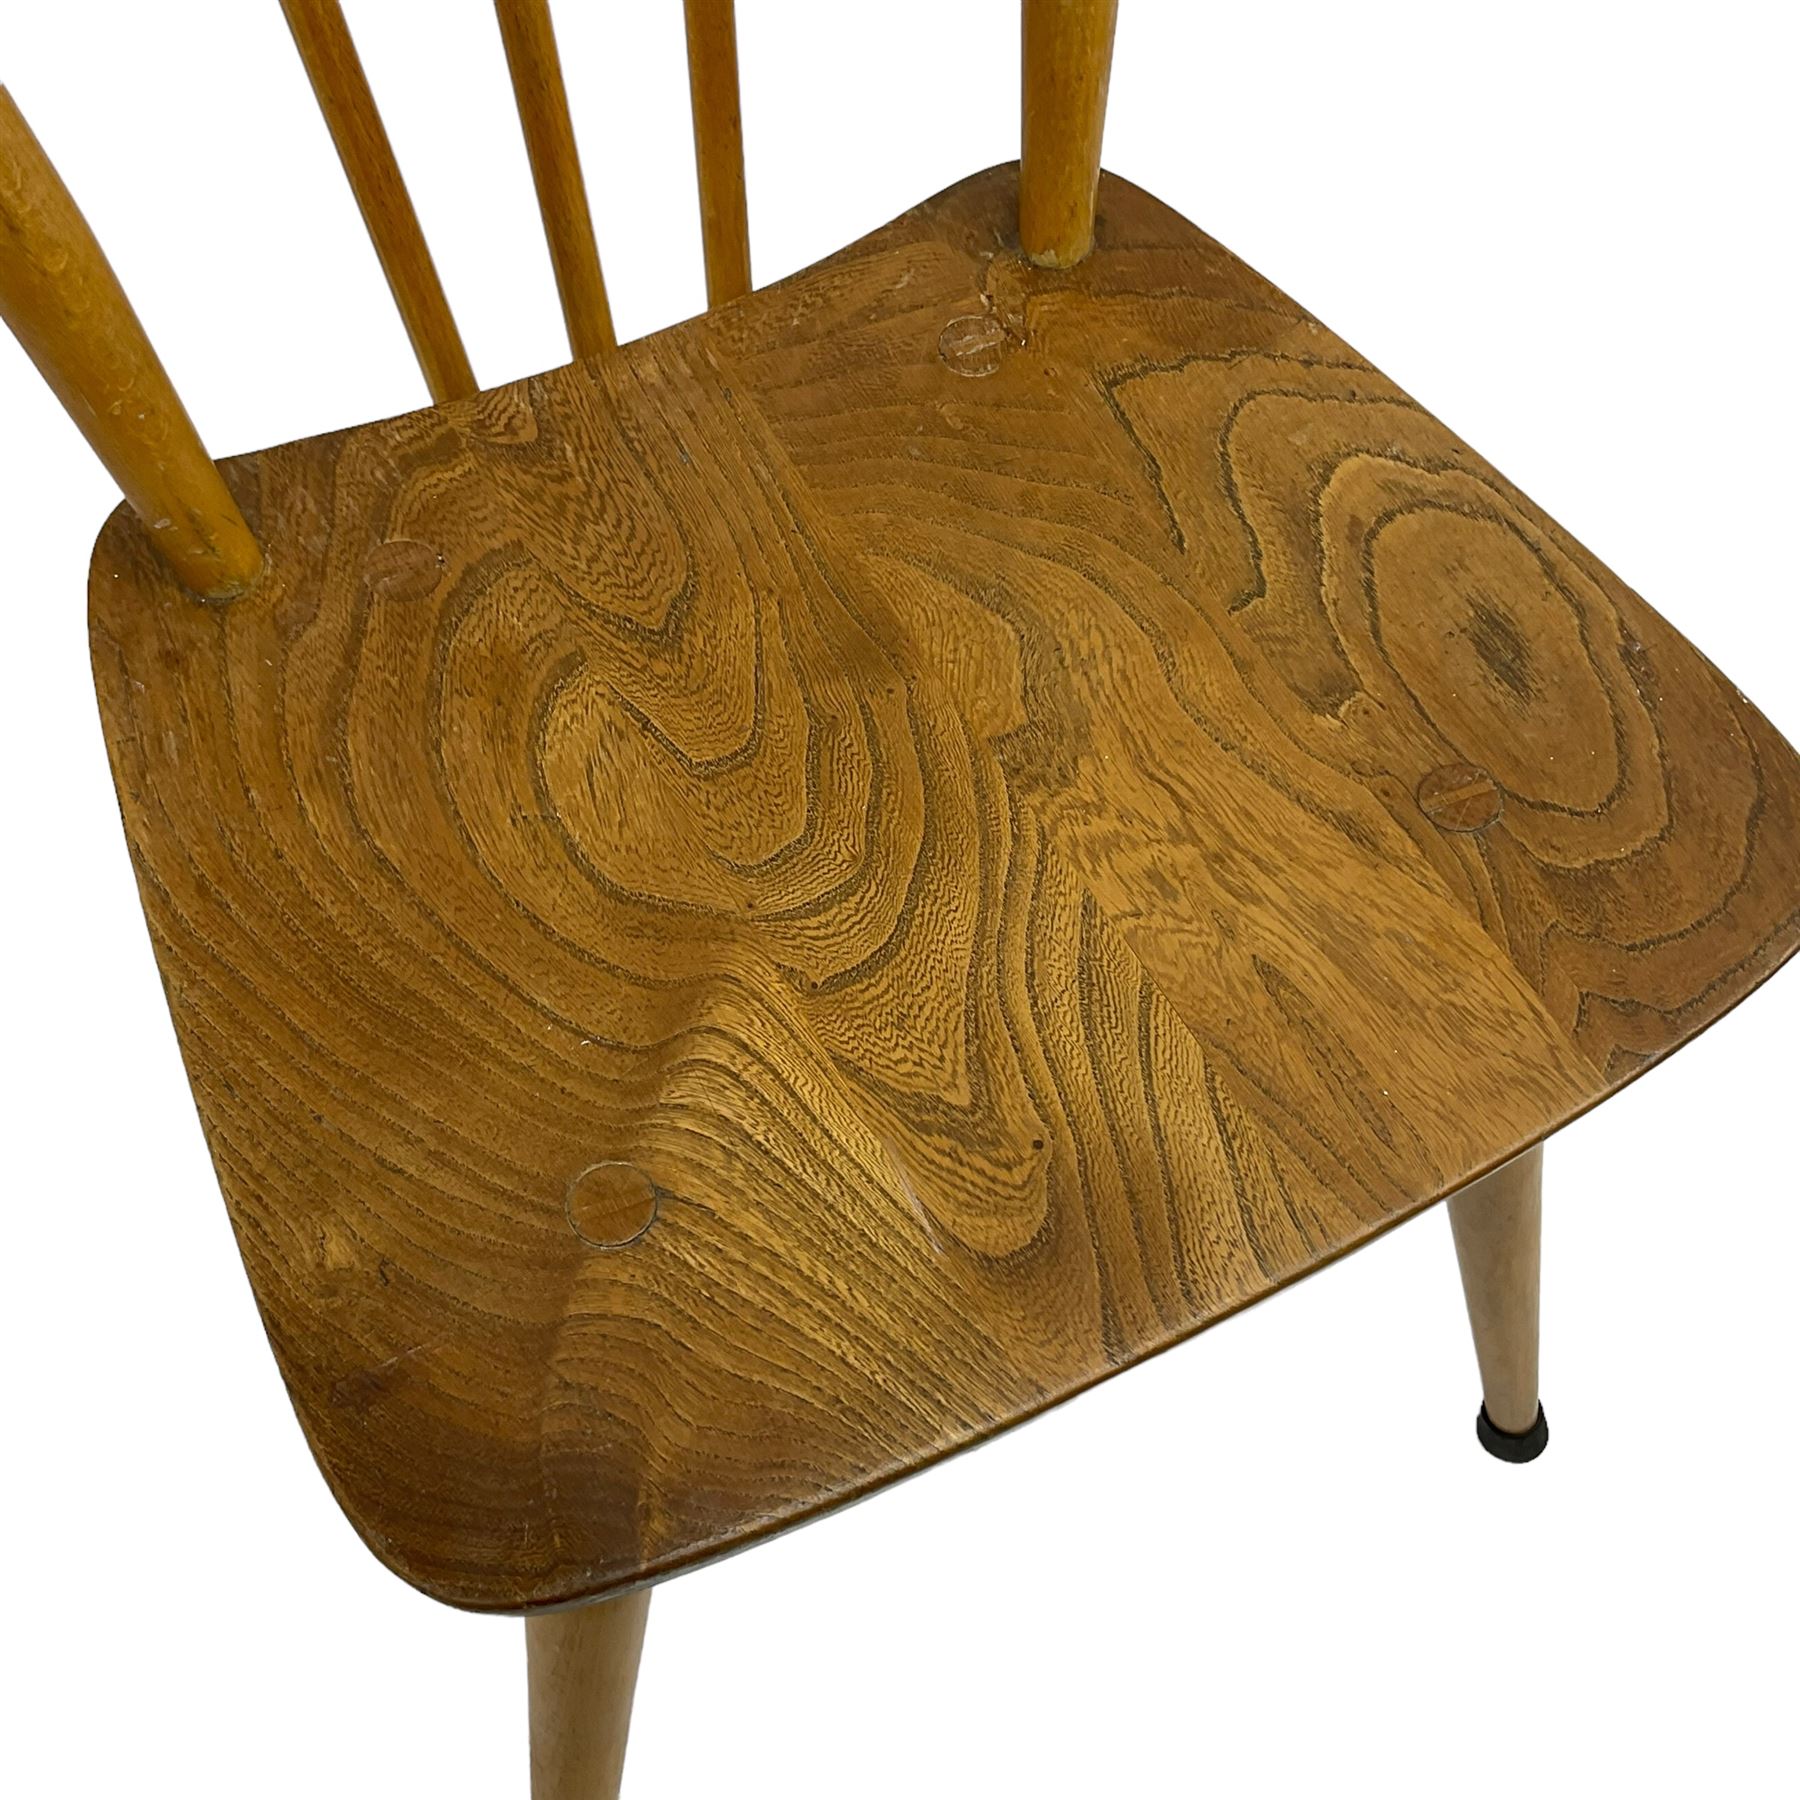 Ercol - set of three elm and beech model '391 All-Purpose Windsor Chairs' - Image 3 of 5